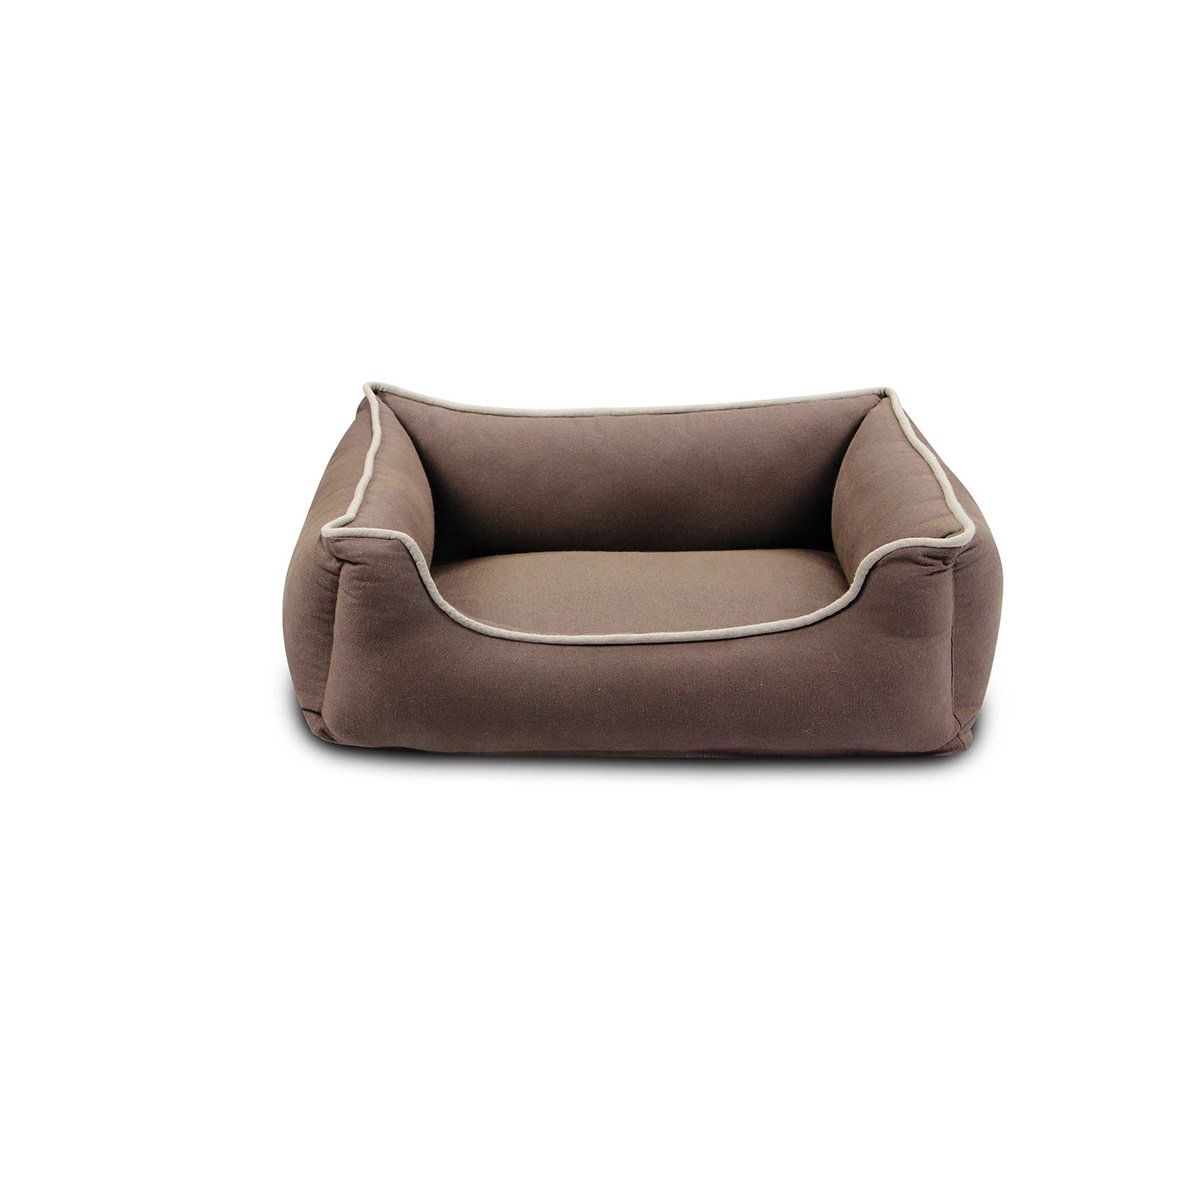 Wolters Eco-Well Hundebett Lounge braun/beige L